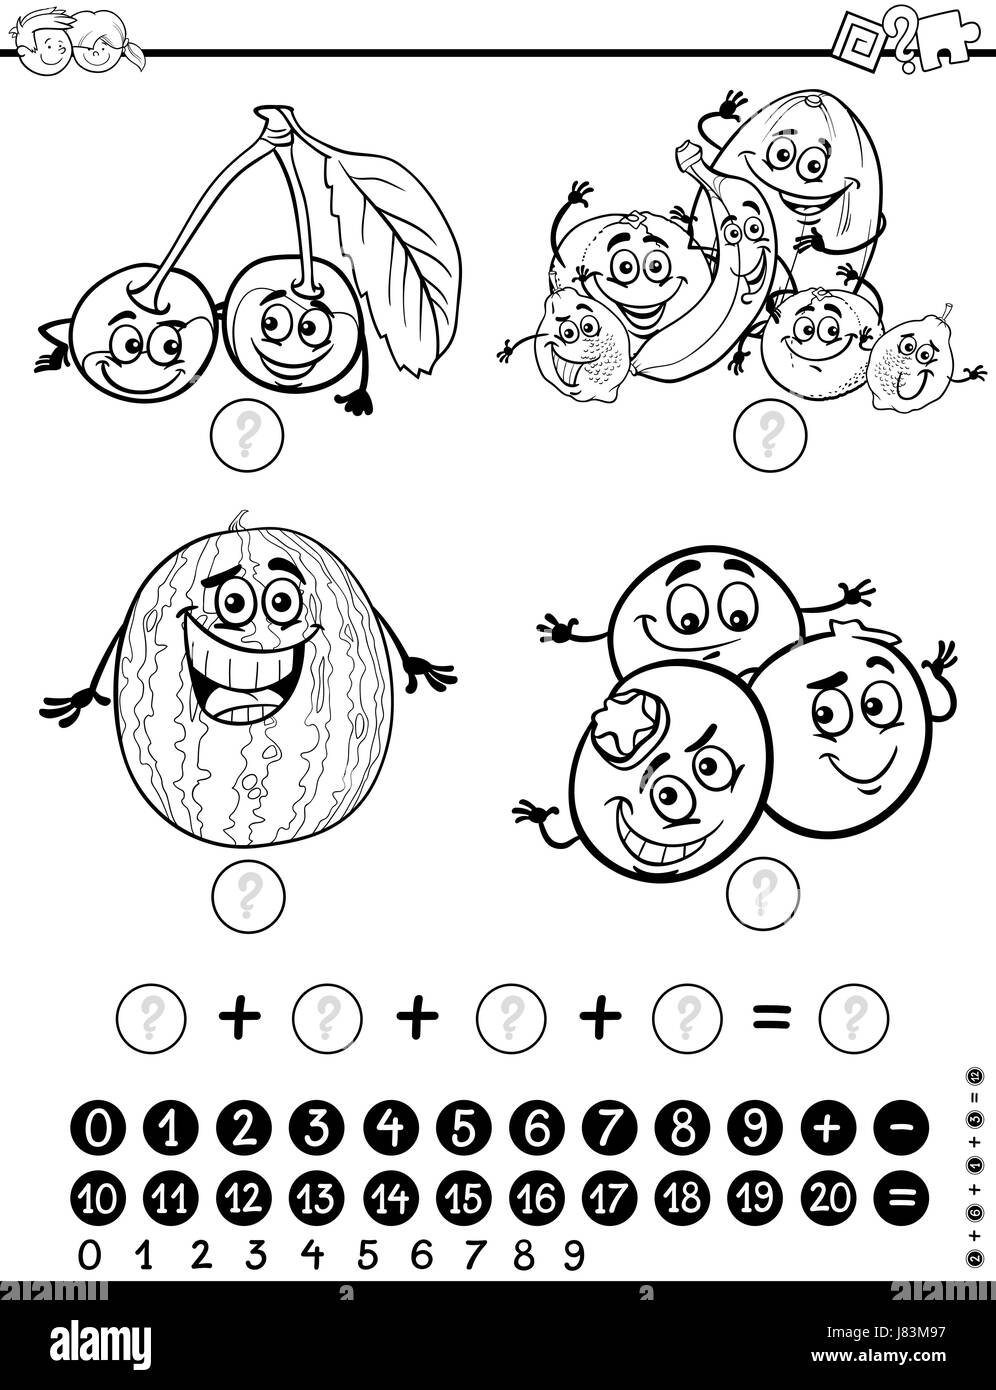 Black and White Cartoon Illustration of Educational Mathematical Activity Game for Children with Fruits Food Object Characters Coloring Page Stock Vector